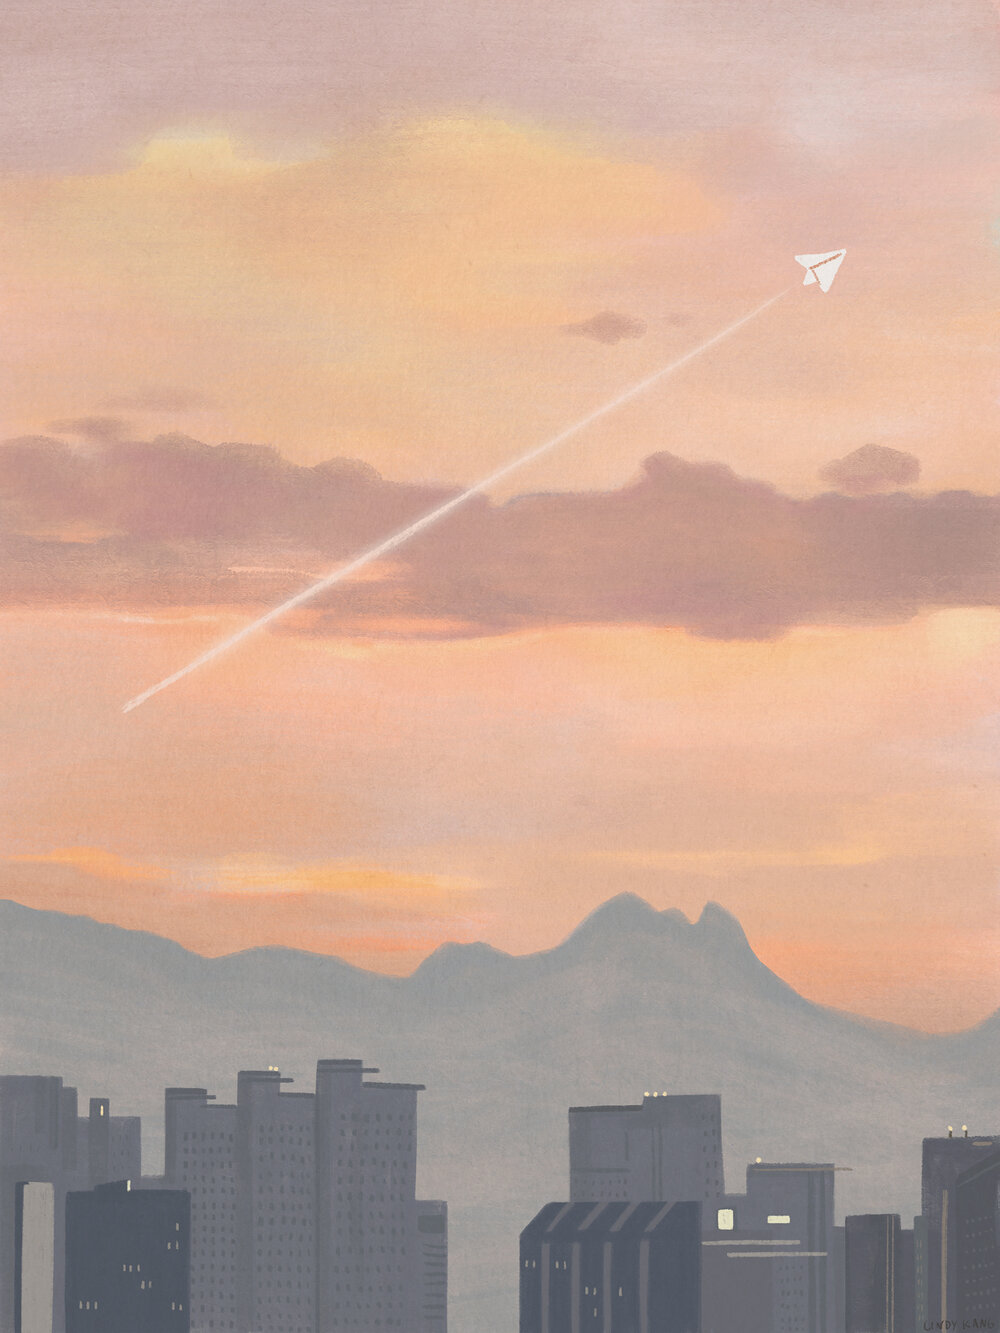 Illustration of a paper plane fly across an evening sky.